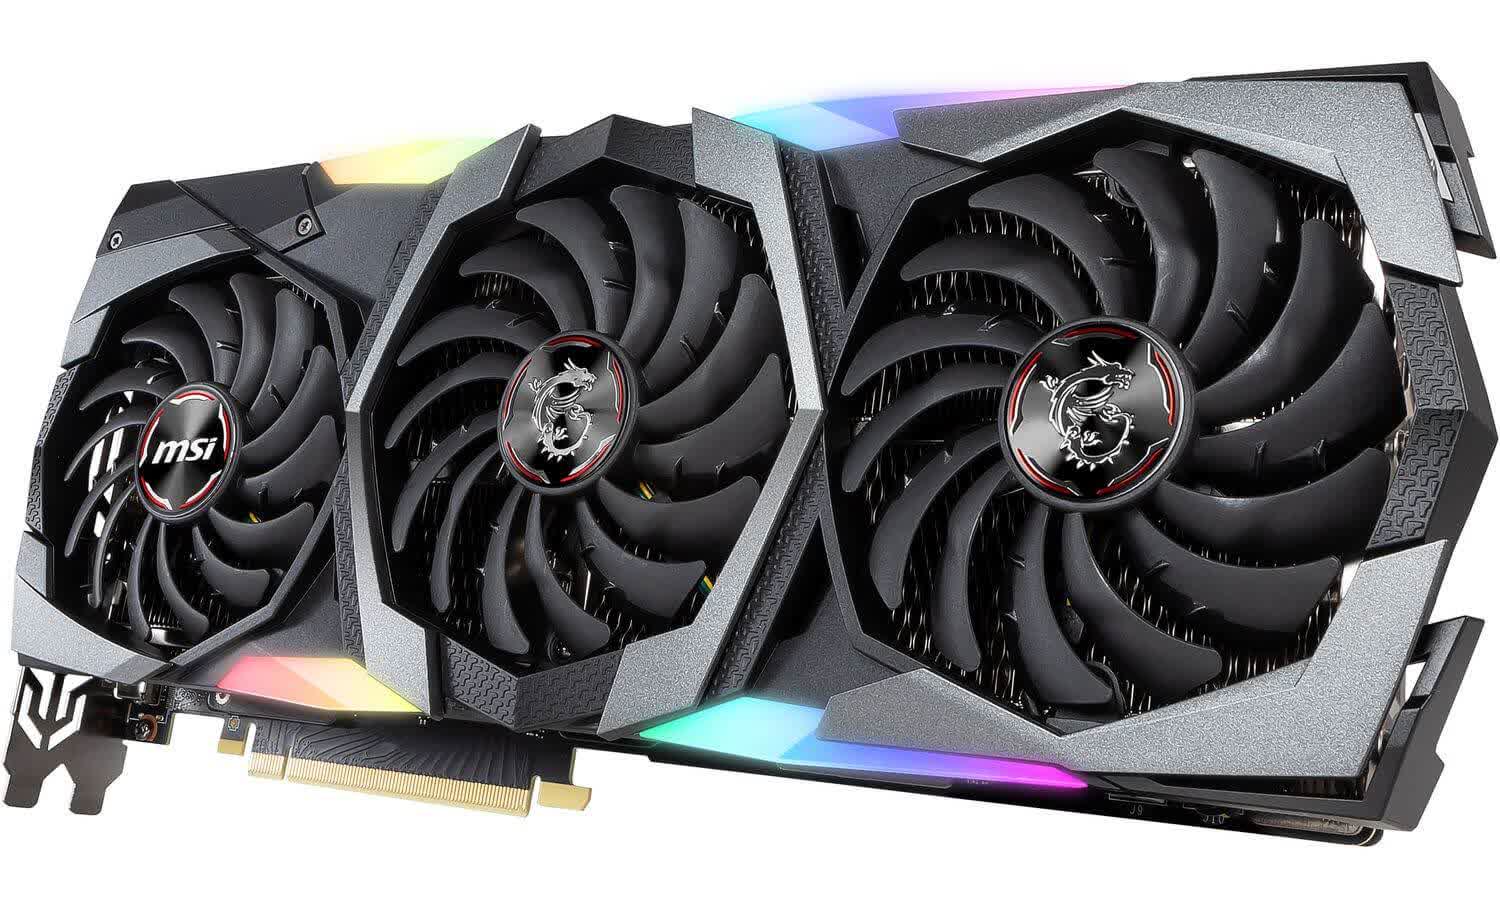 motivet prioritet Kejserlig MSI GeForce RTX 2080 Gaming X Trio Reviews, Pros and Cons | TechSpot